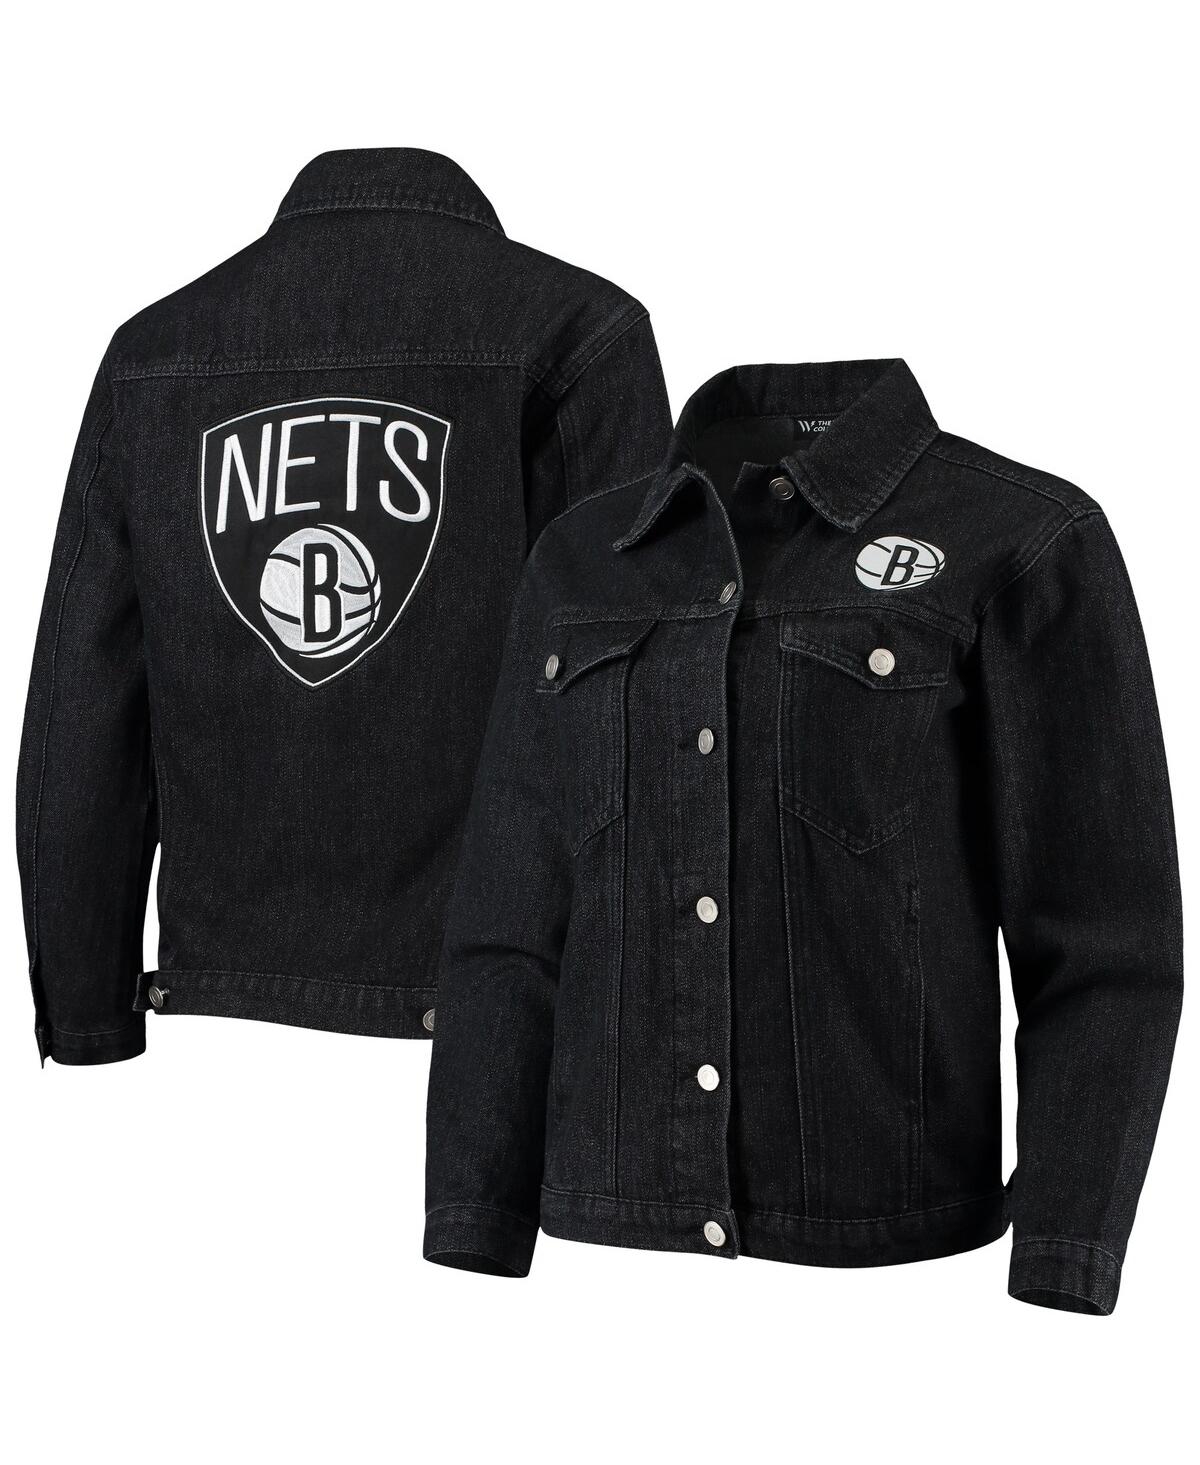 Shop The Wild Collective Women's  Black Brooklyn Nets Patch Denim Button-up Jacket